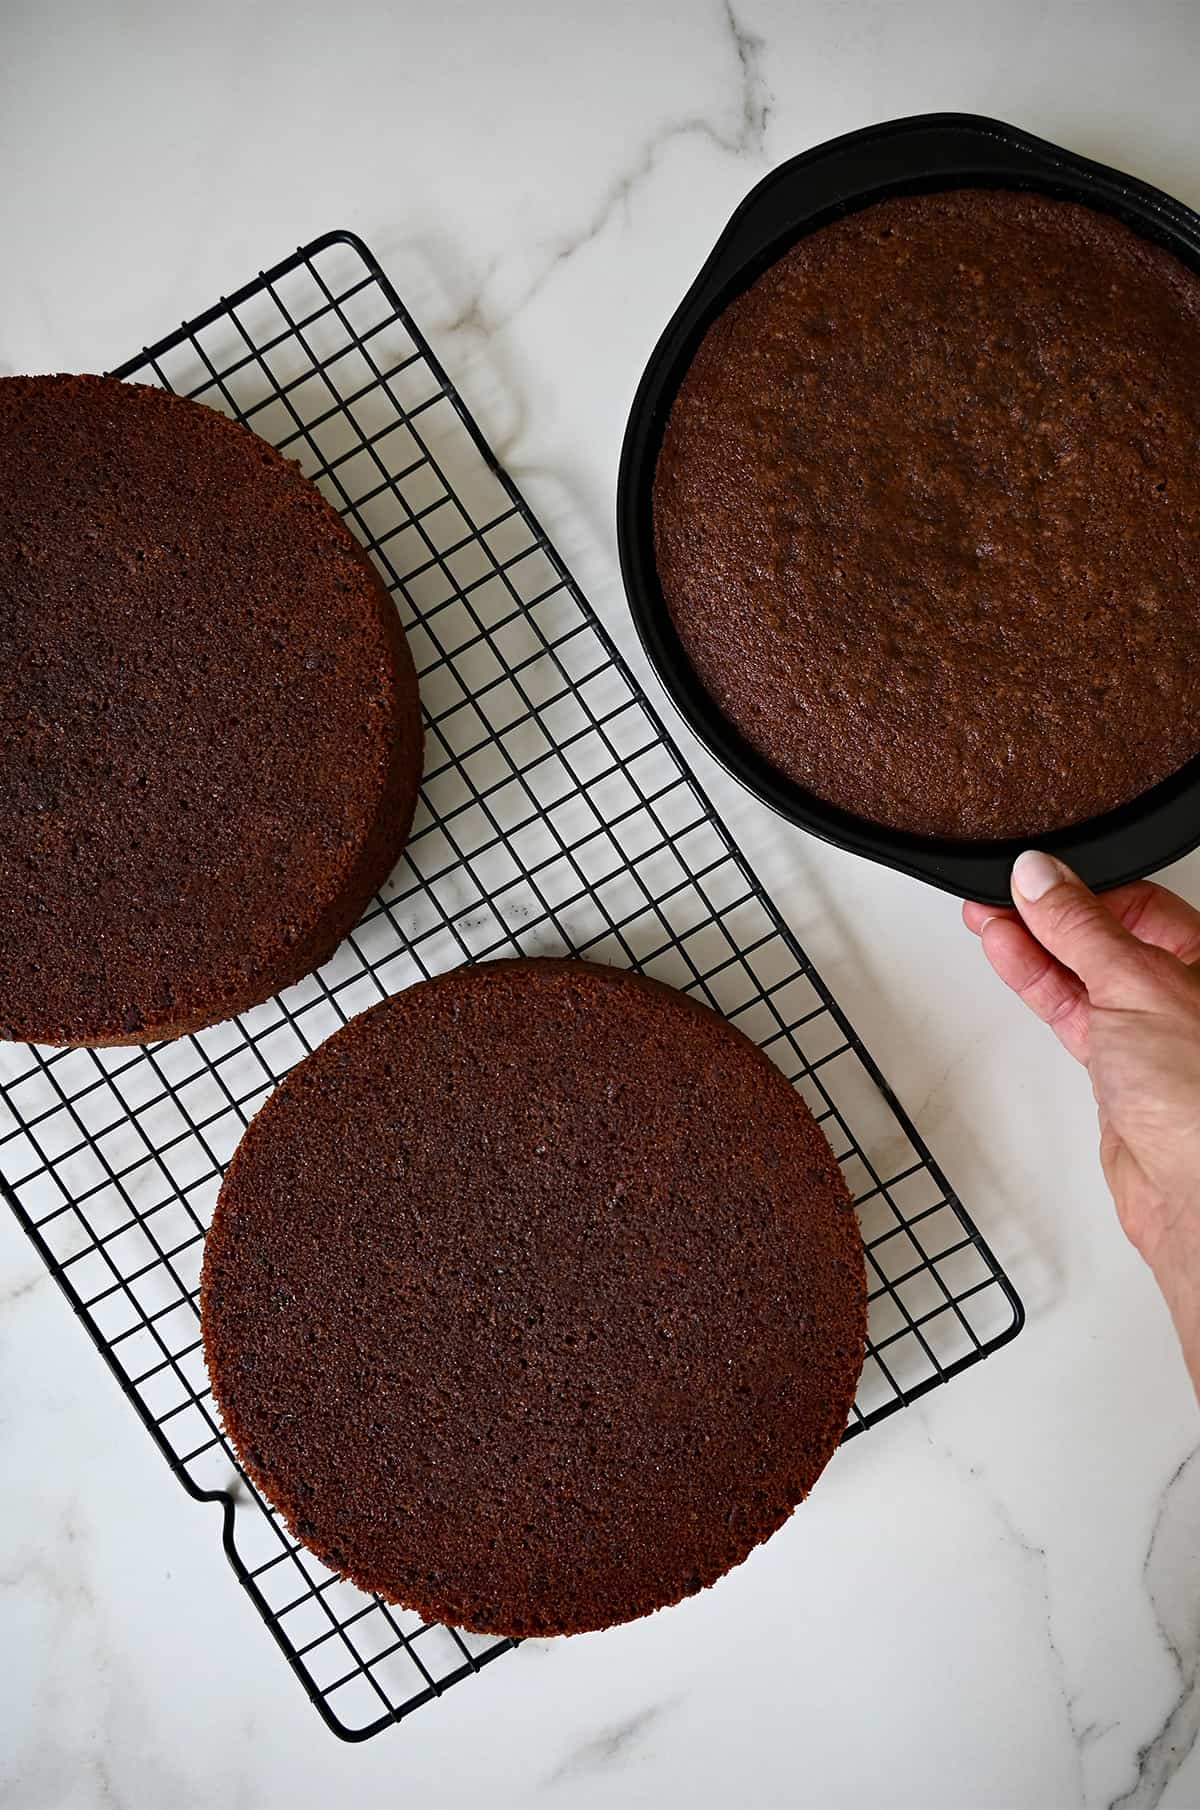 Two round chocolate cakes cooling on a wire rack next to a freshly baked cake in a round cake pan.